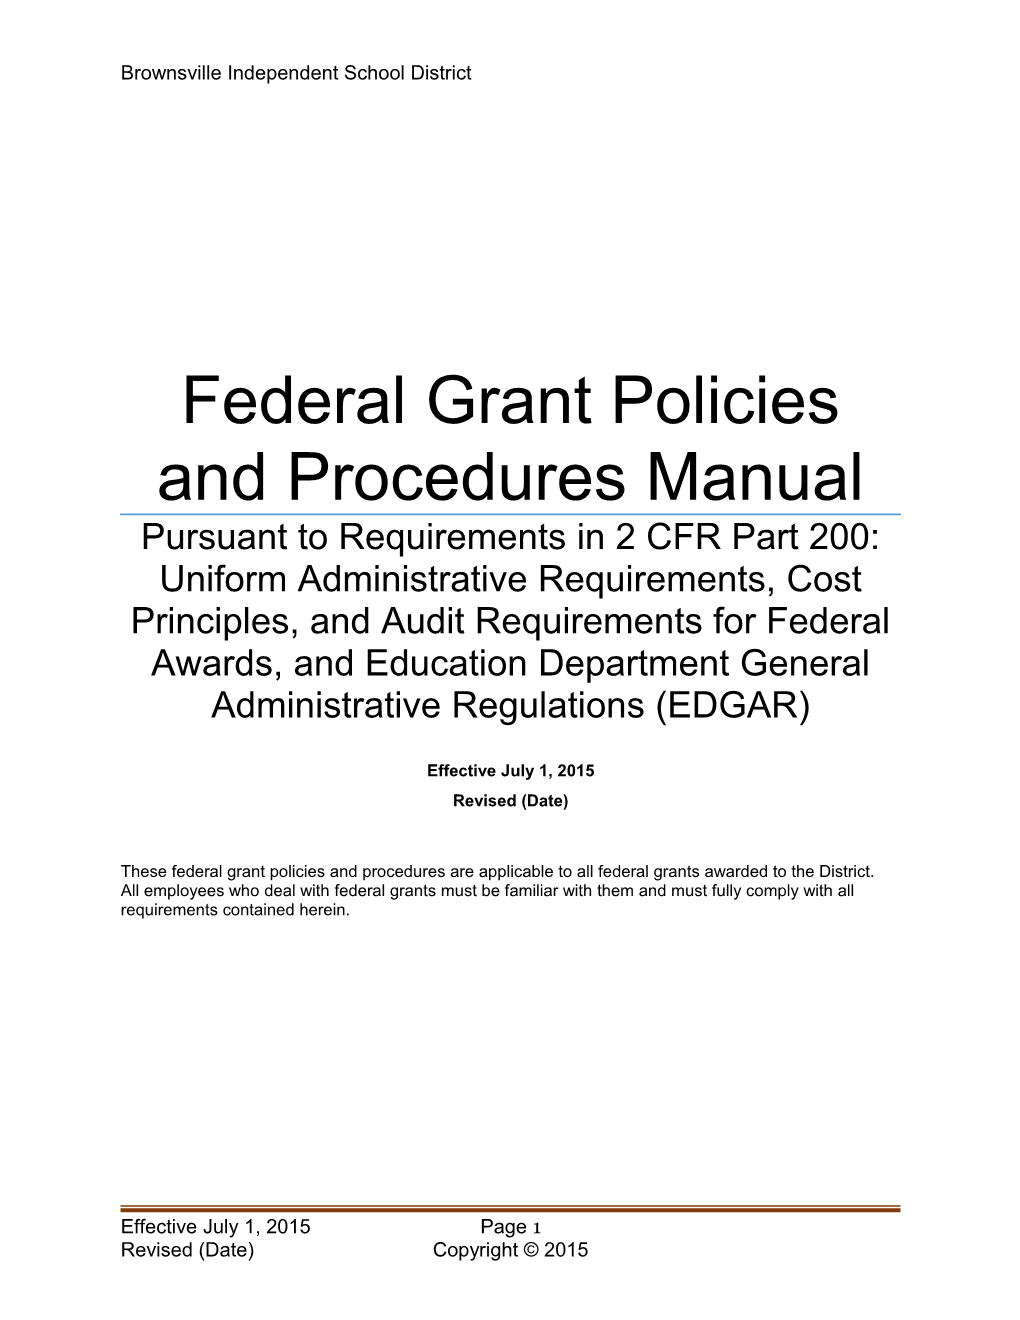 Federal Grant Policies And Procedures Manual